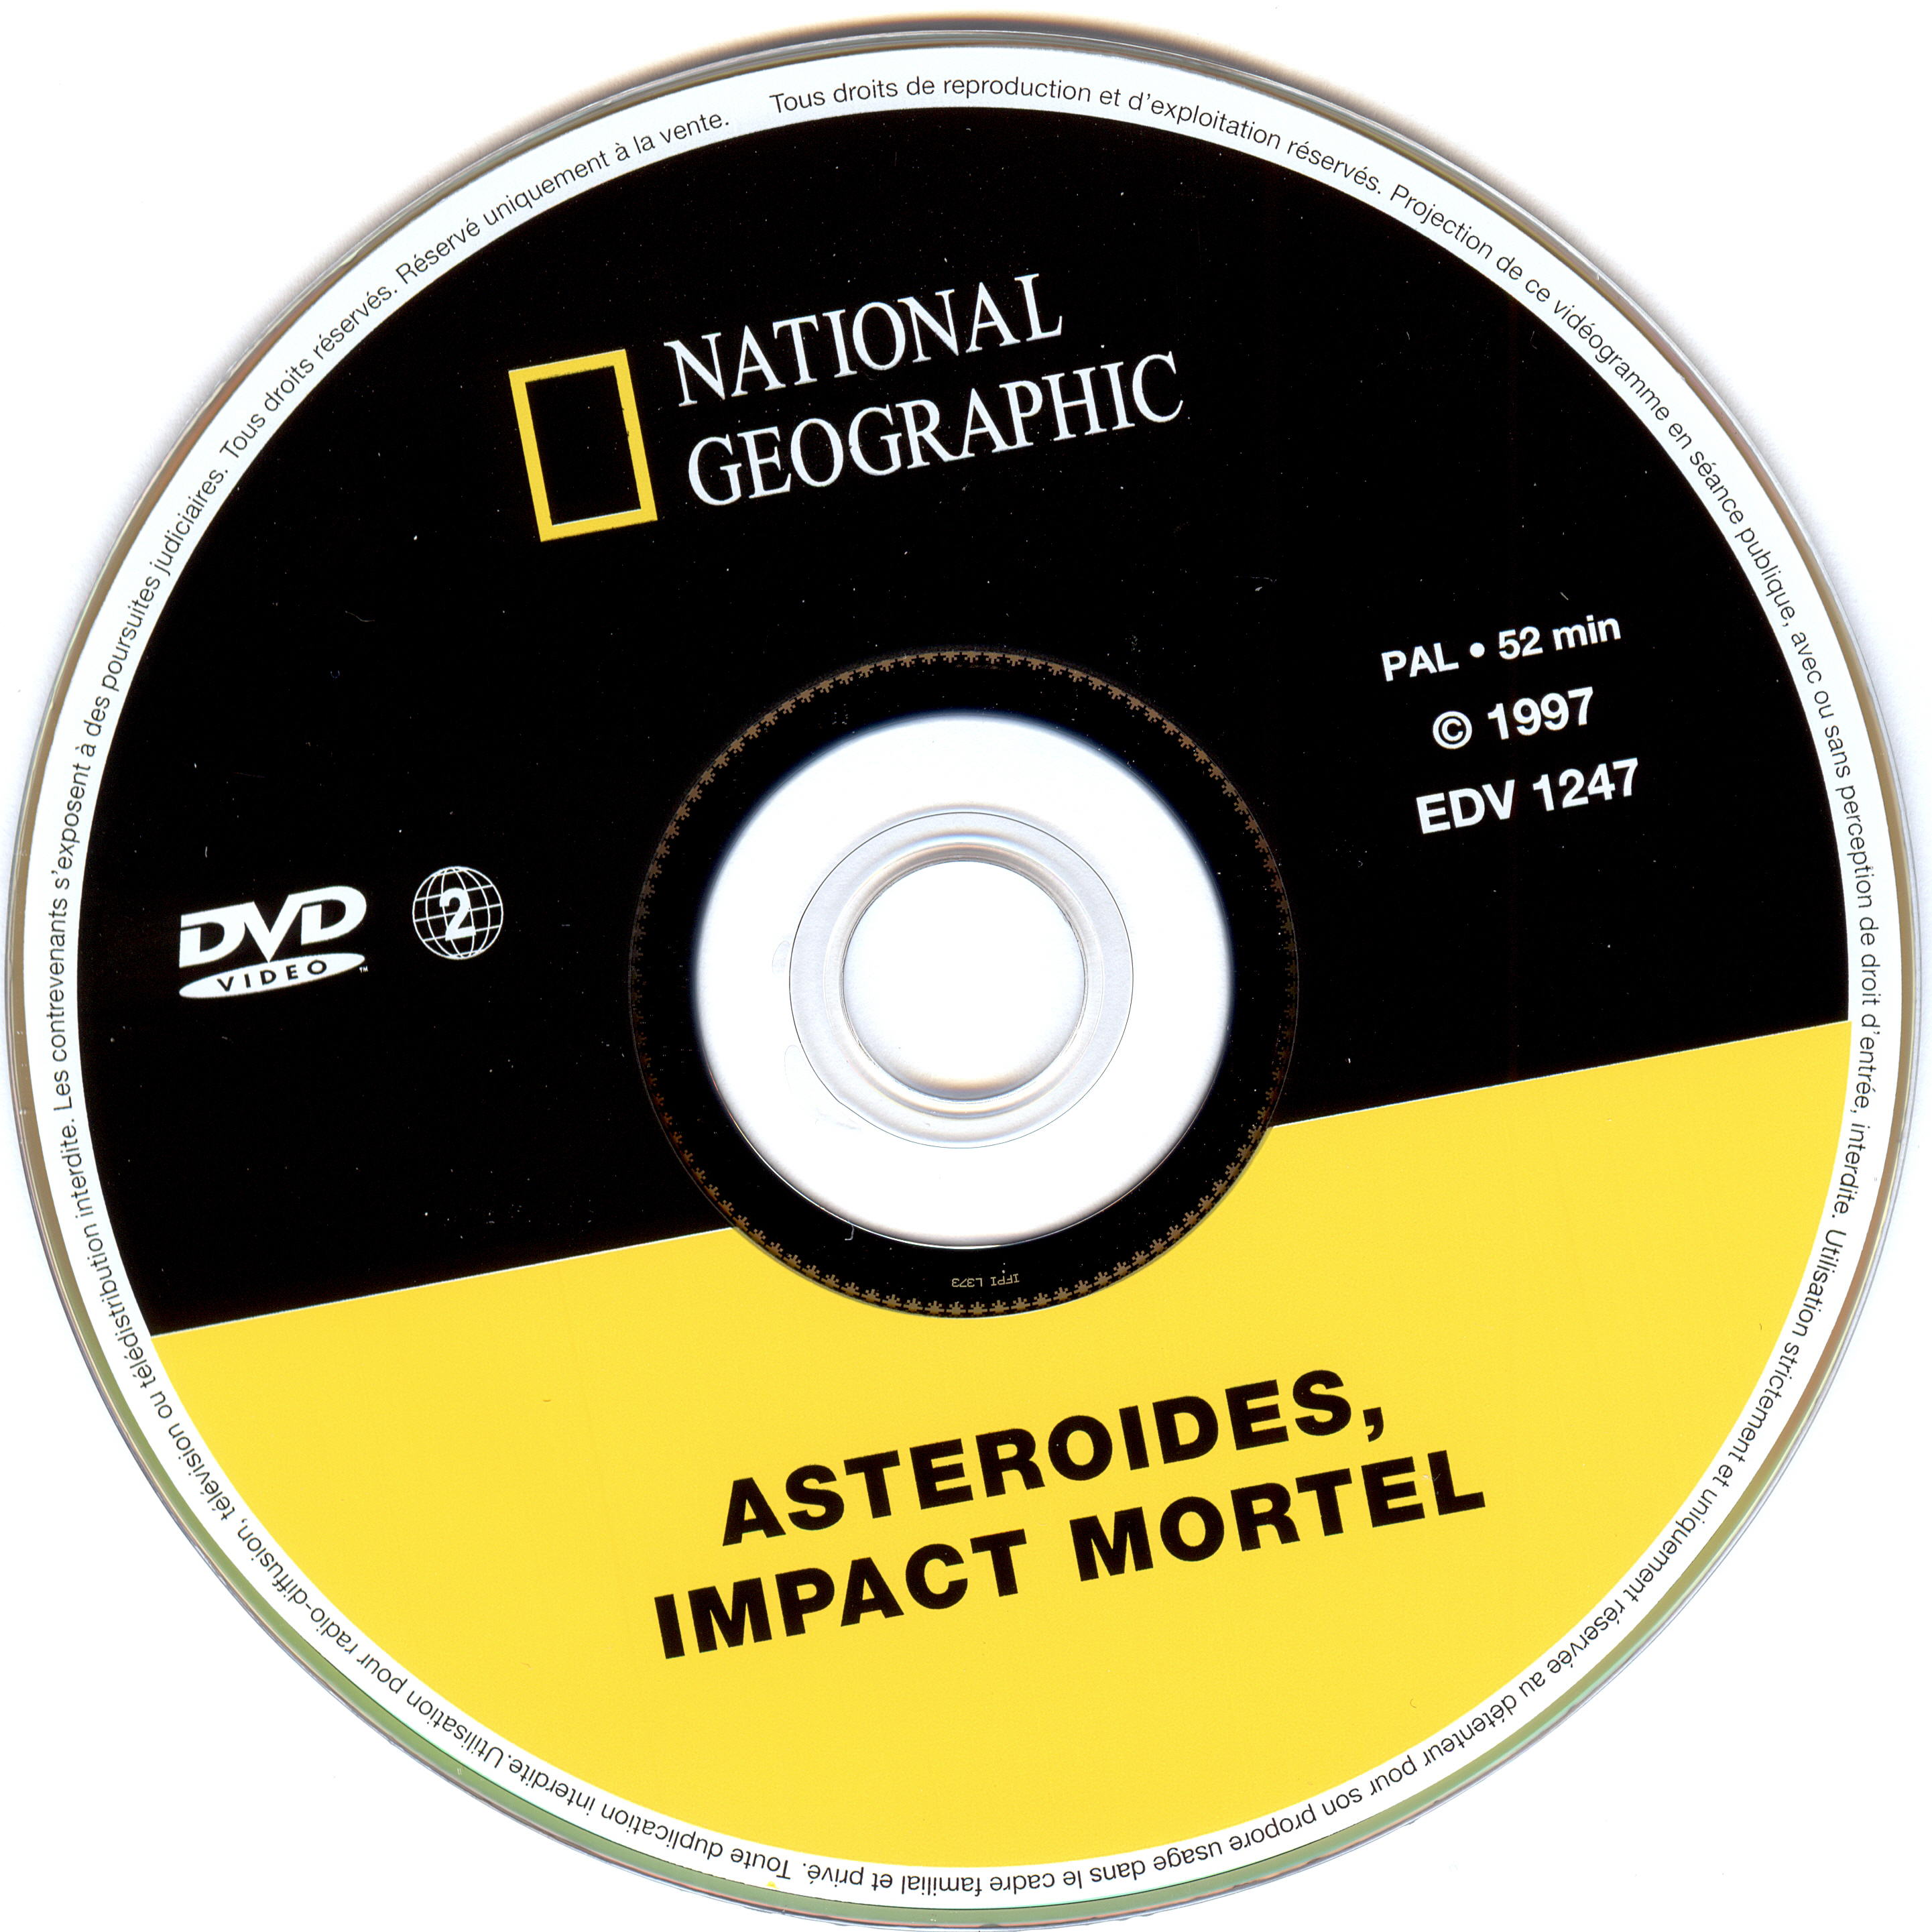 National Geographic - Asteroides impact mortel